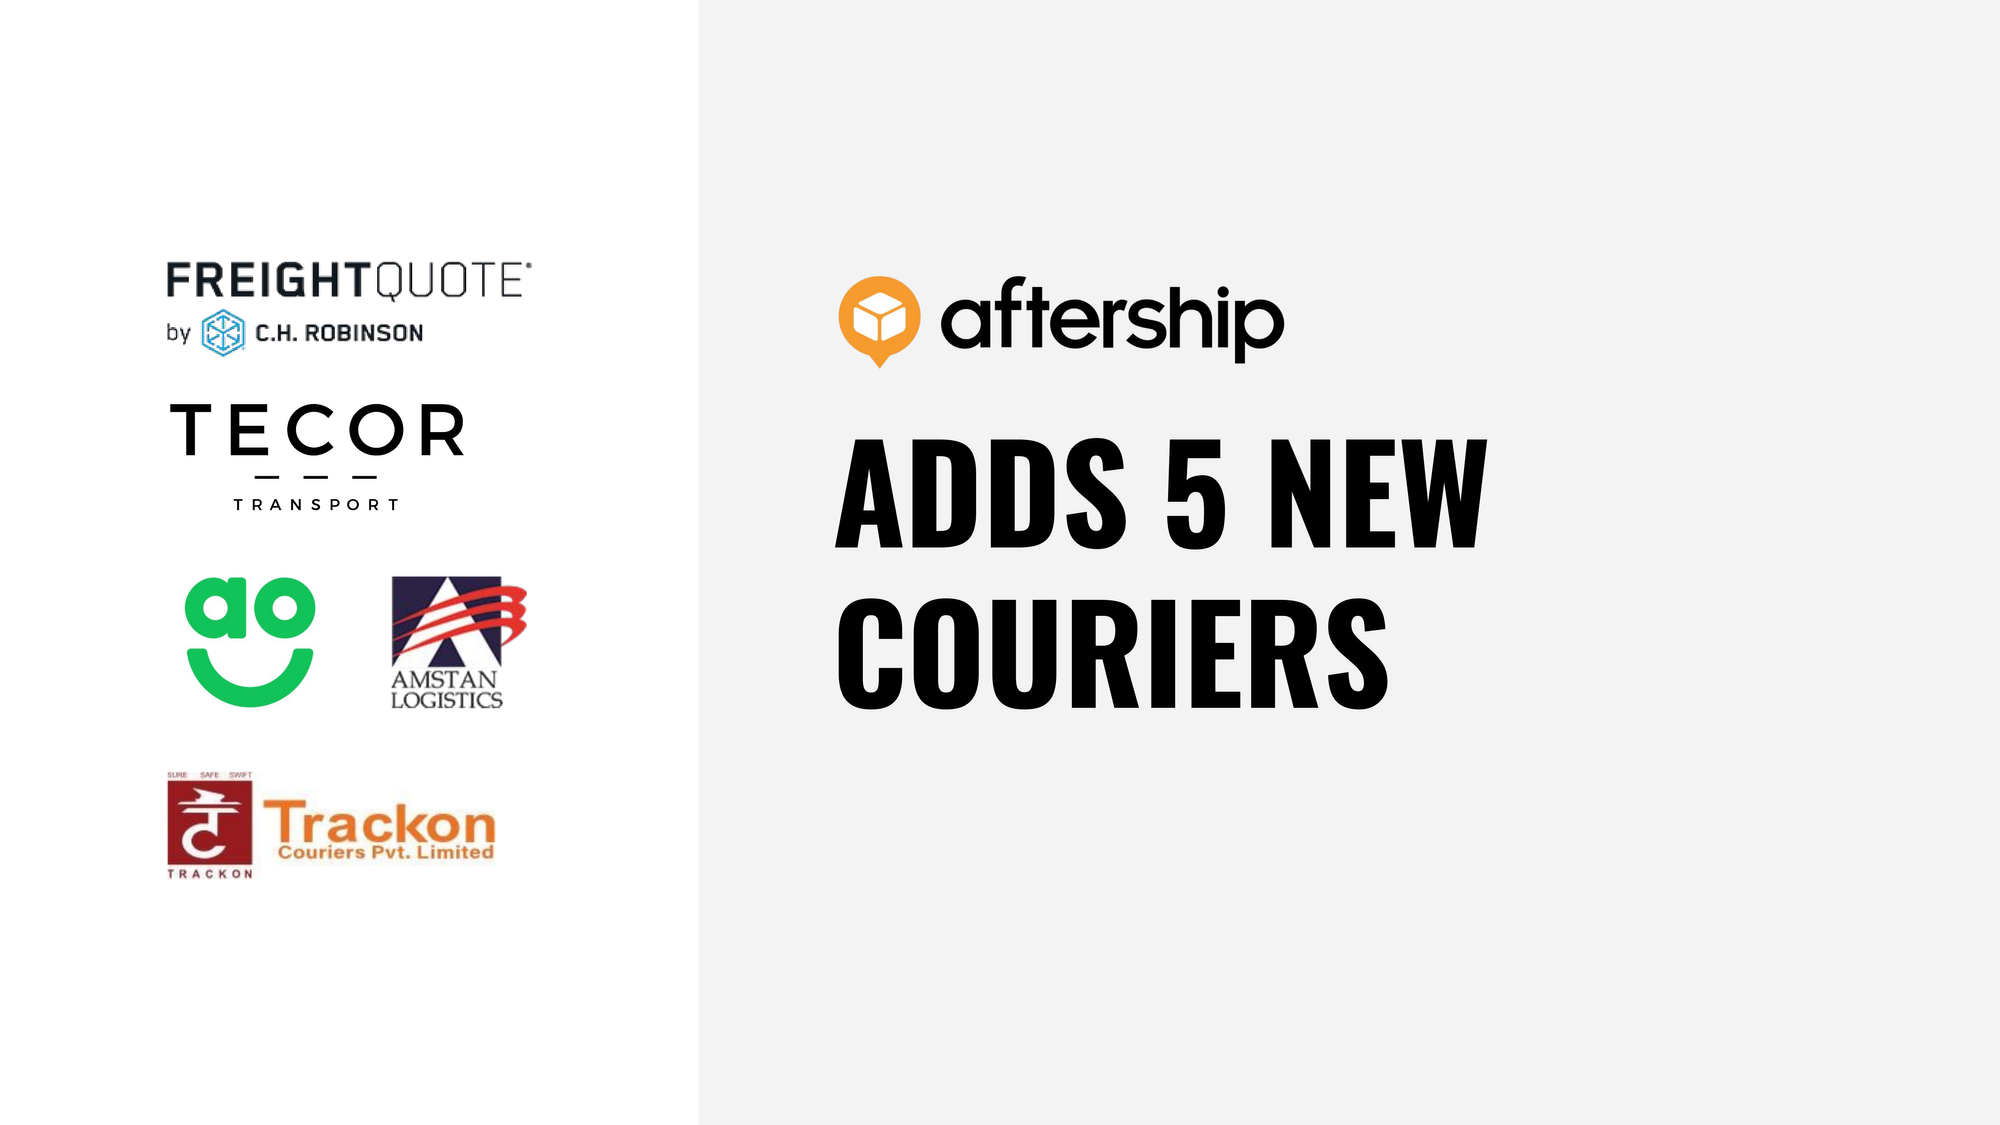 AfterShip adds 5 new couriers this week (7 Dec 2020 to 11 Dec 2020)